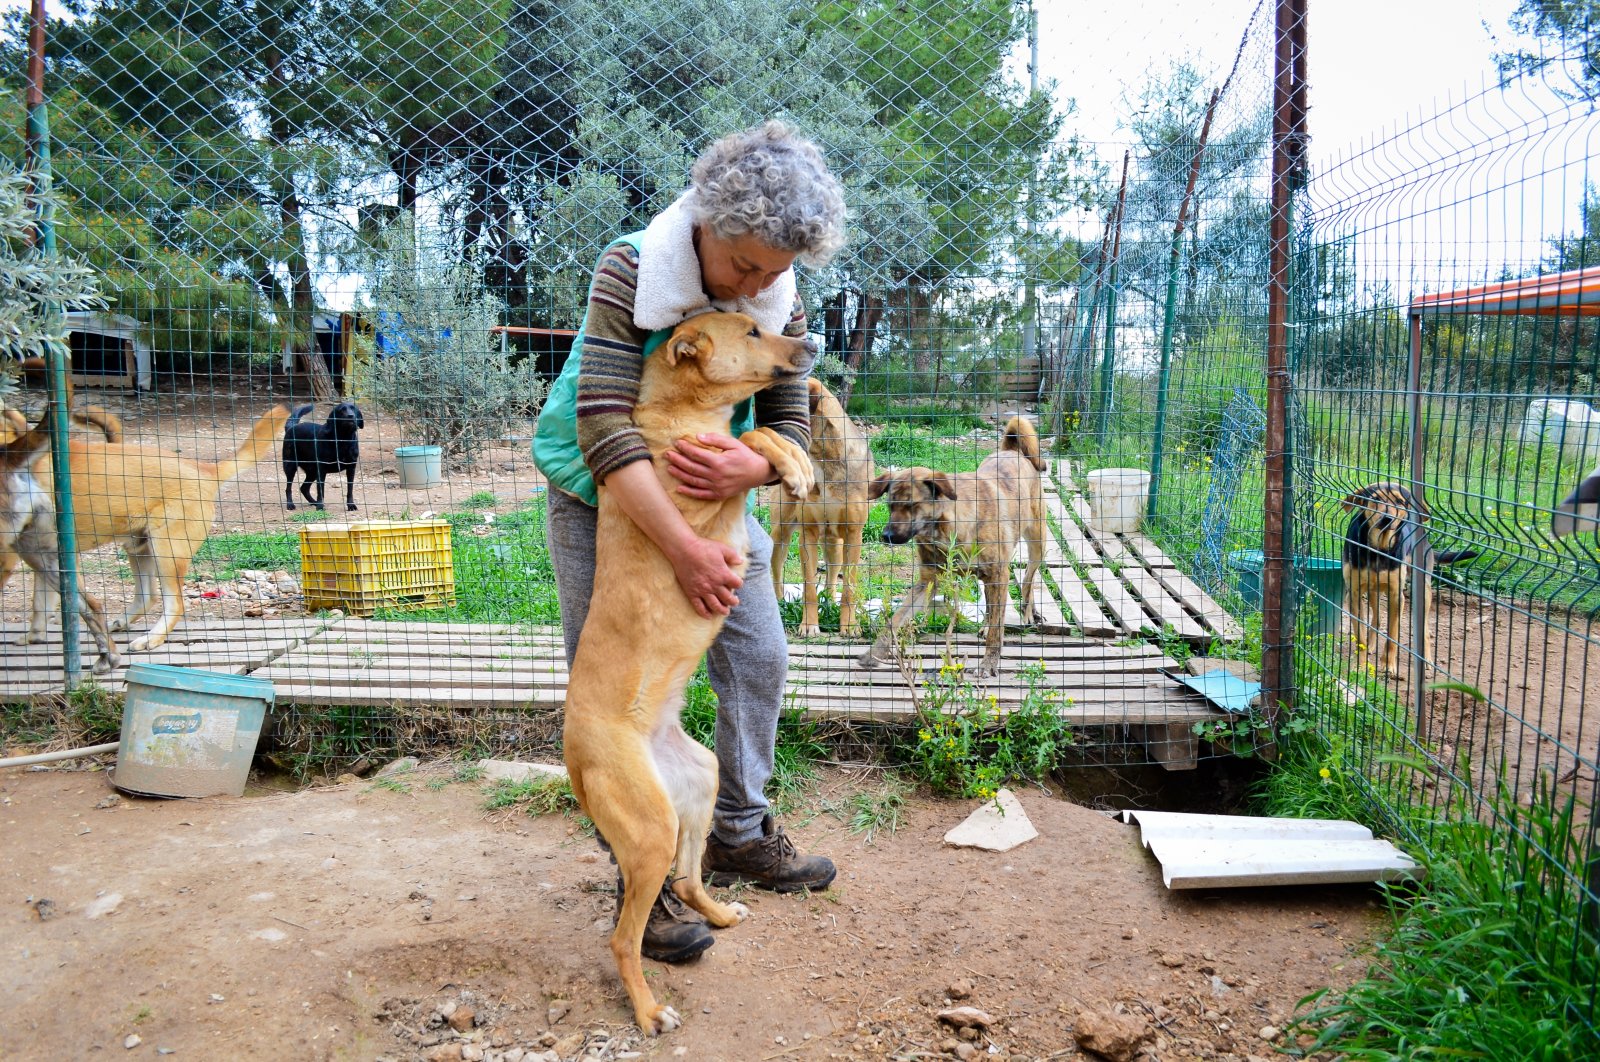 Mihriban Mammadova embraces a dog she cares for in her animal shelter, in Mersin, southern Turkey, Aug. 10, 2021. (AA PHOTO) 